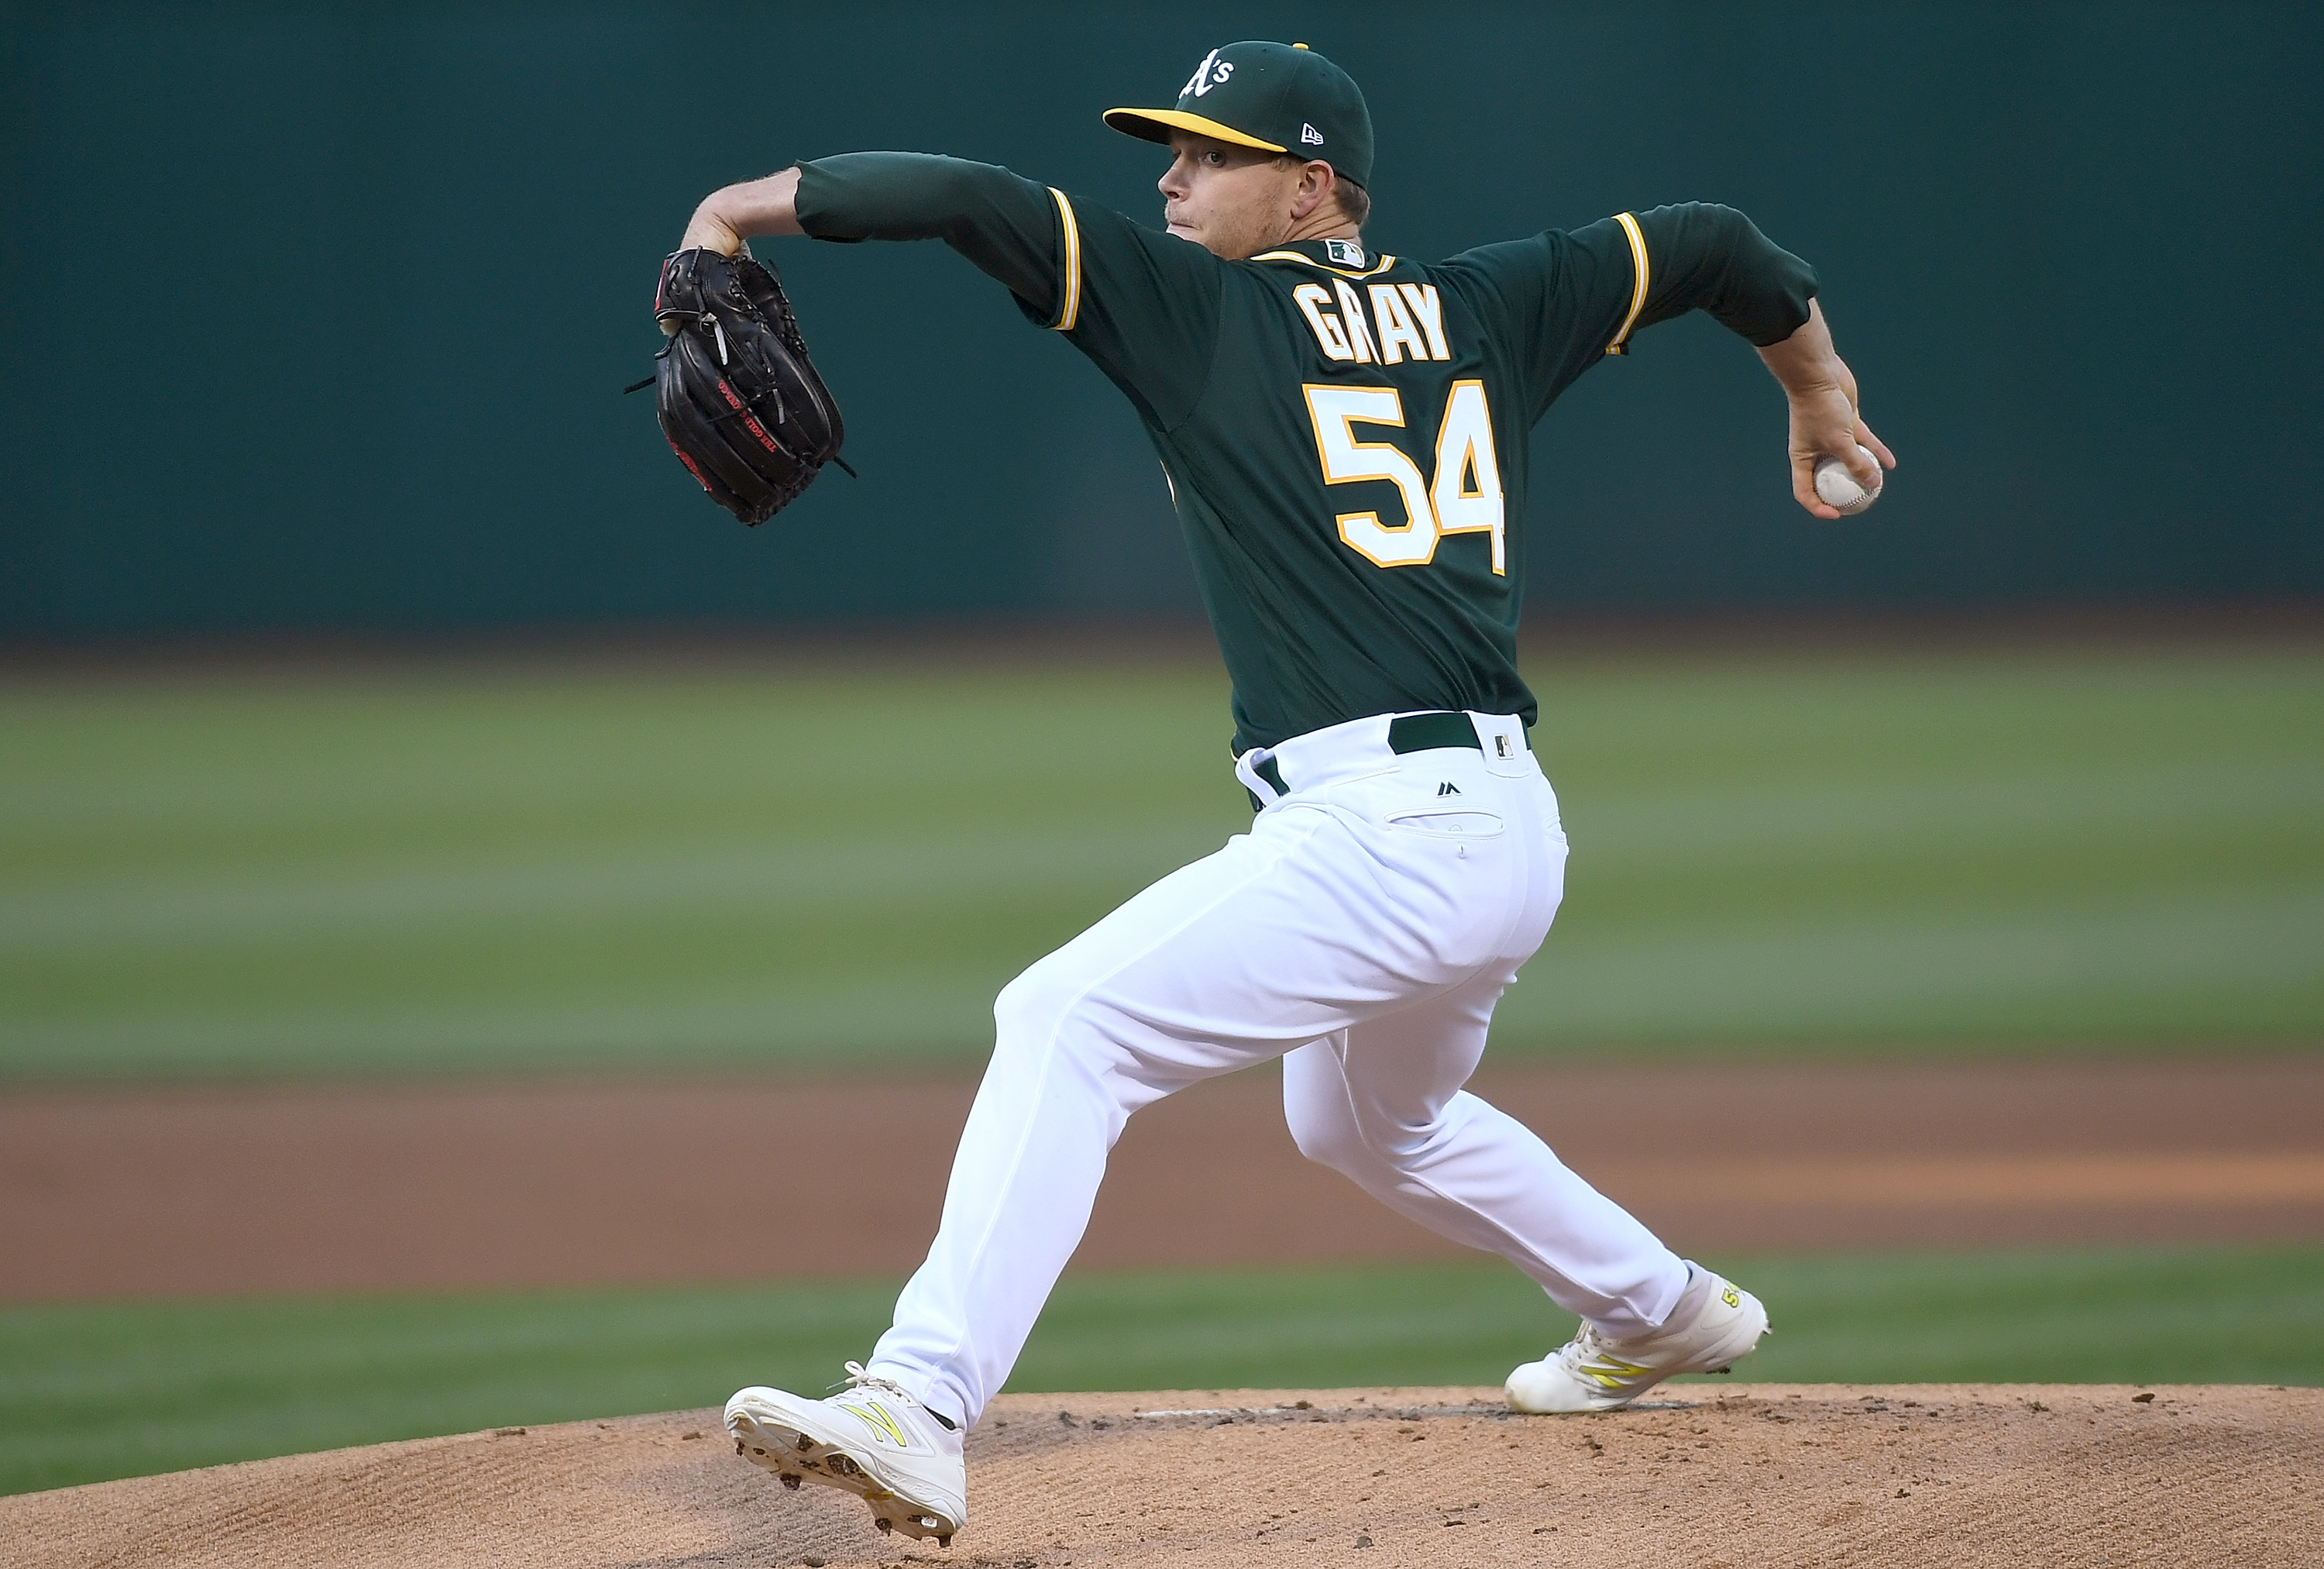 Yankees Hope Their New Acquisition Sonny Gray Is a Bargain - The